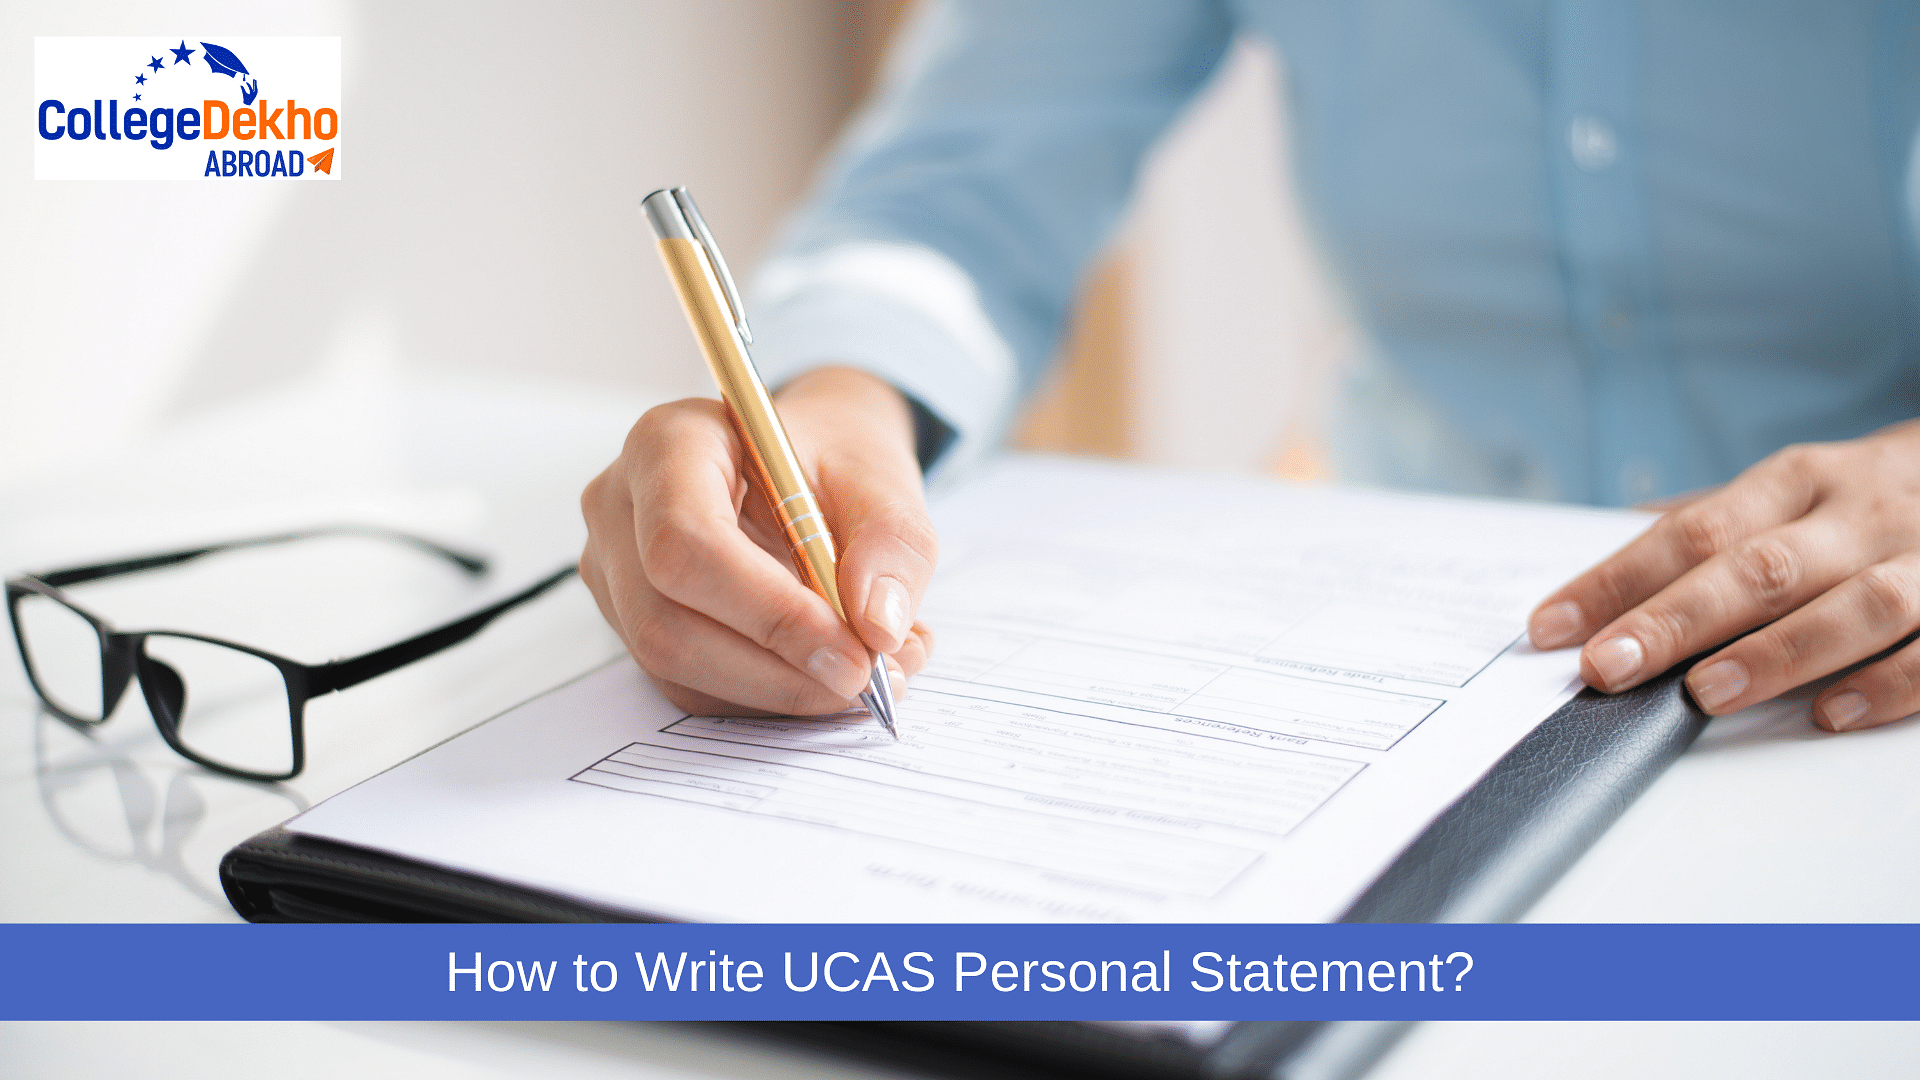 Tips to Write UCAS Personal Statement